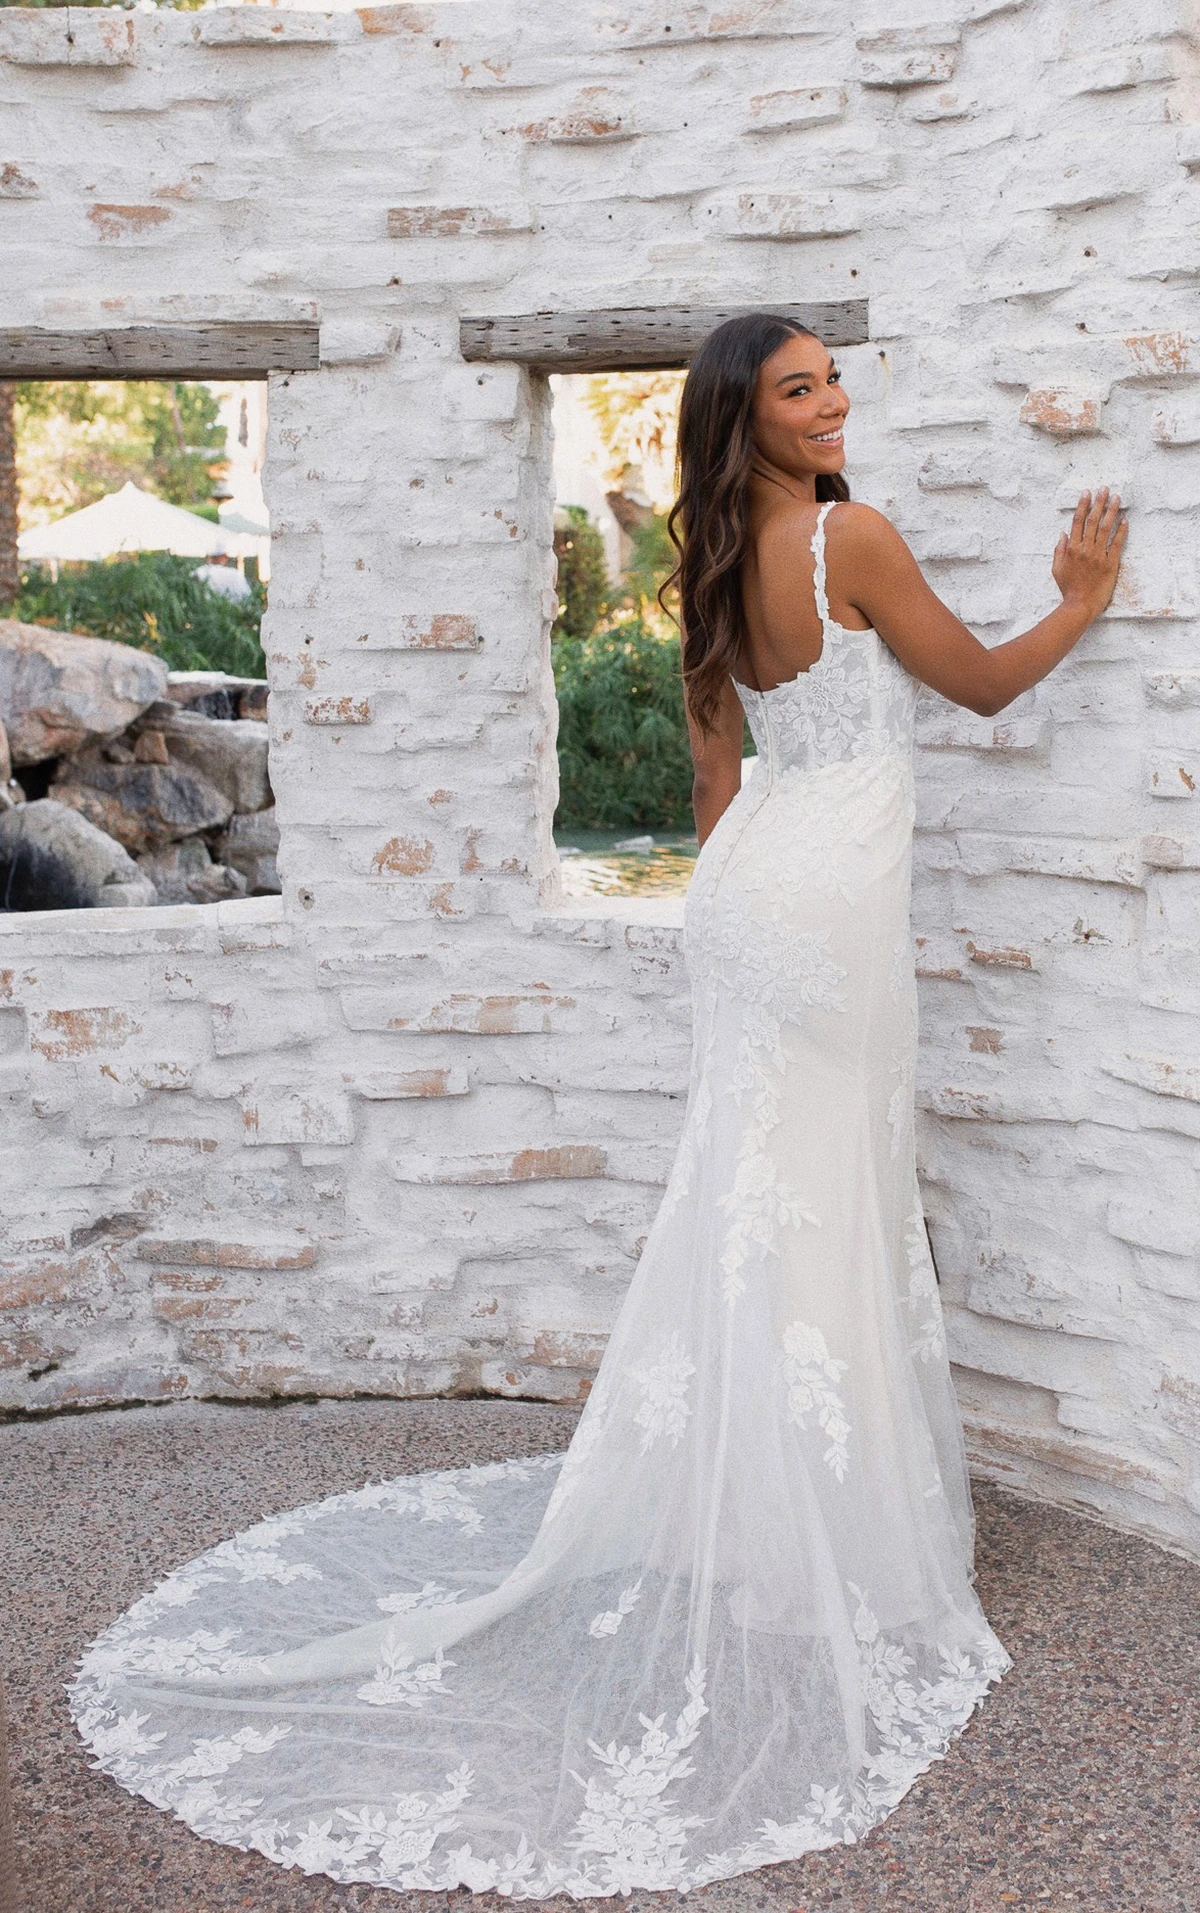 lace fit-and-flare wedding dress with embellished train and square neckline - 7762 by Stella York